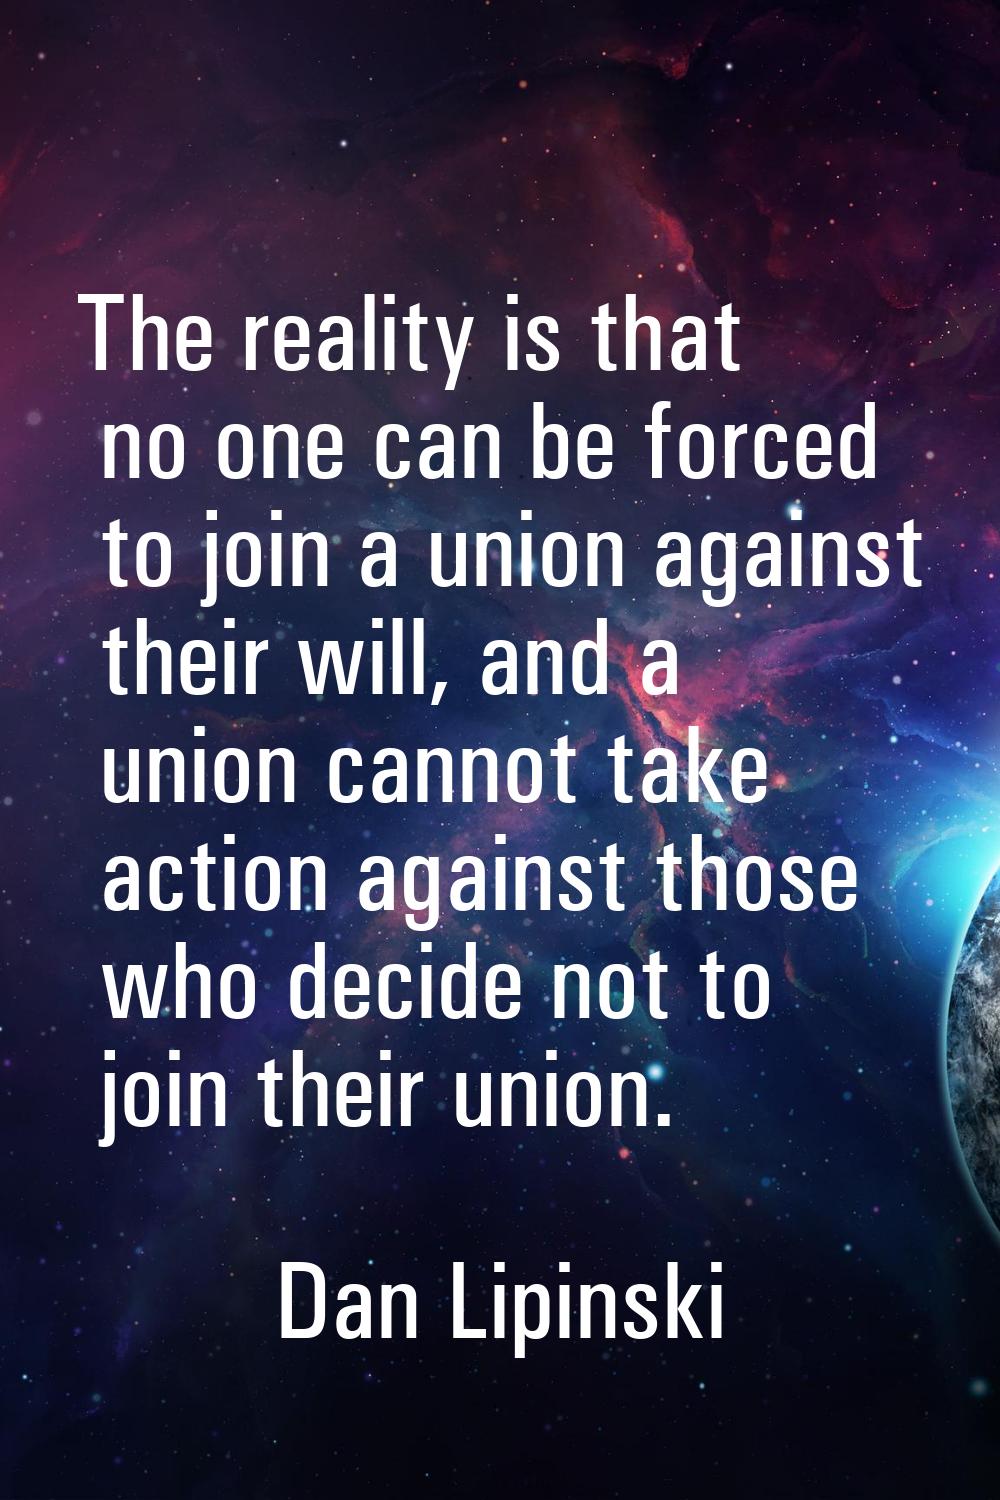 The reality is that no one can be forced to join a union against their will, and a union cannot tak